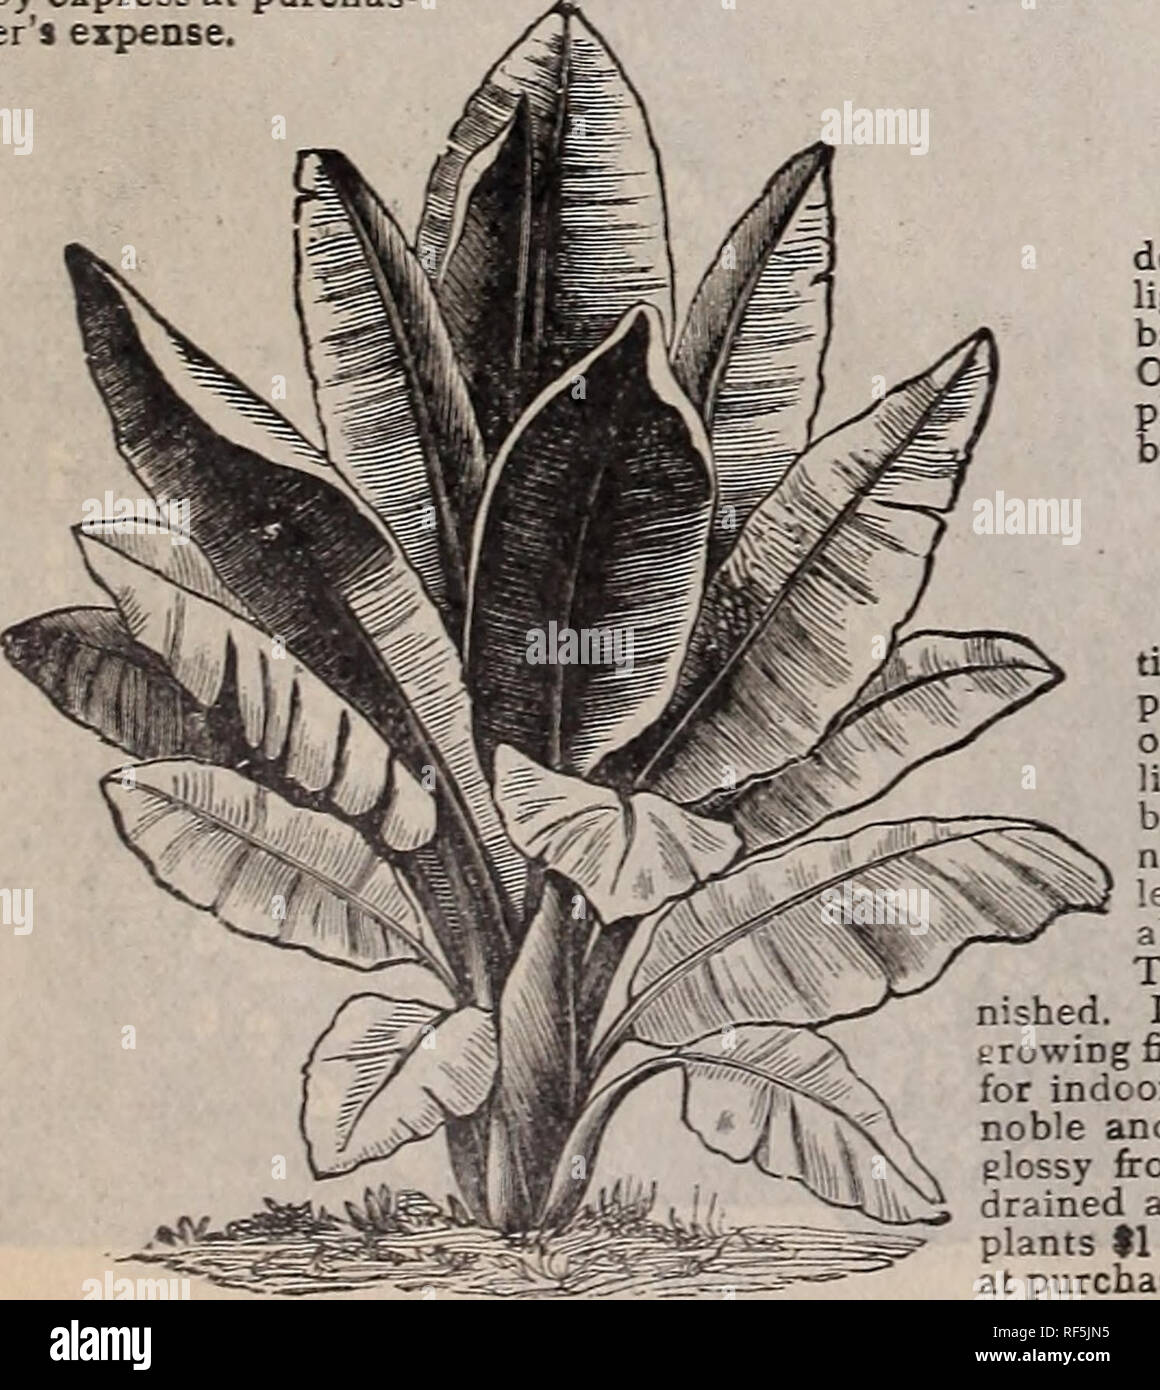 . Catalogue : 1902. Nursery stock Ontario Toronto Catalogs; Vegetables Seeds Catalogs; Flowers Seeds Catalogs; Plants, Ornamental Catalogs; Bulbs (Plants) Catalogs; Fruit Catalogs; Agricultural implements Catalogs. LATANIA BORBONICA MUSA ENSETE The leaves are magnificent, long, broad and massive; of a beautiful green, with a broad crimson mid-rib; the plant grows luxuriantly from 8 to 12 feet high. During the hot summer, when planted out, it grows rapidly, and attains gigantic proportions, producing a tropical effect on the lawn, terrace or flower garden. It can be stored in a light cellar or  Stock Photo